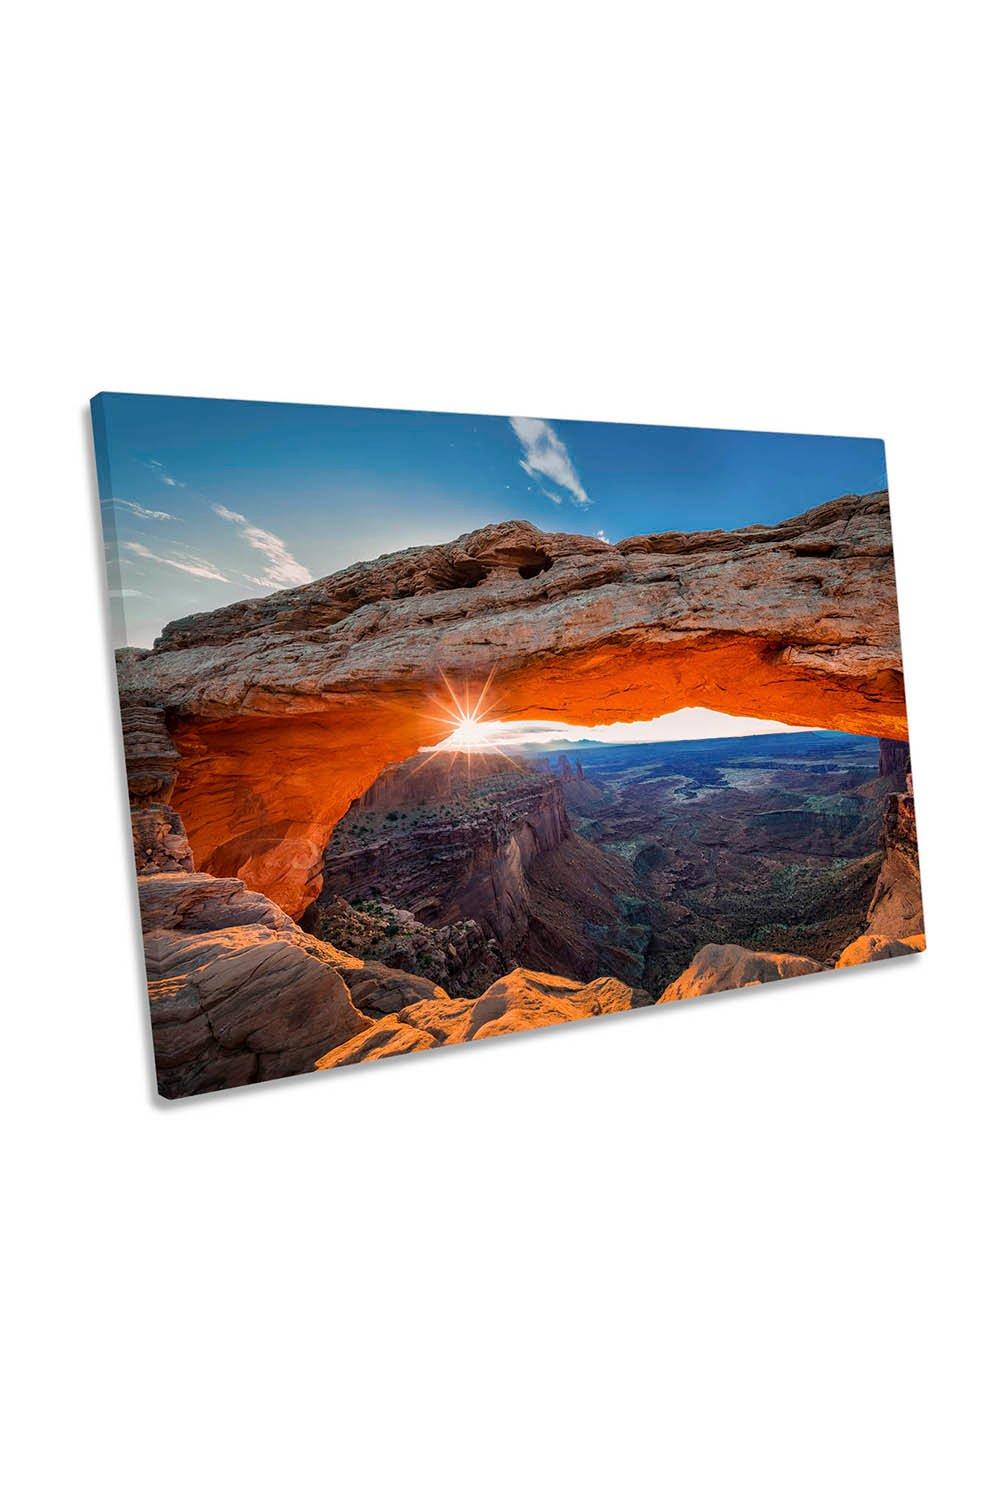 Sunrise at Mesa Arch Canyons Canvas Wall Art Picture Print